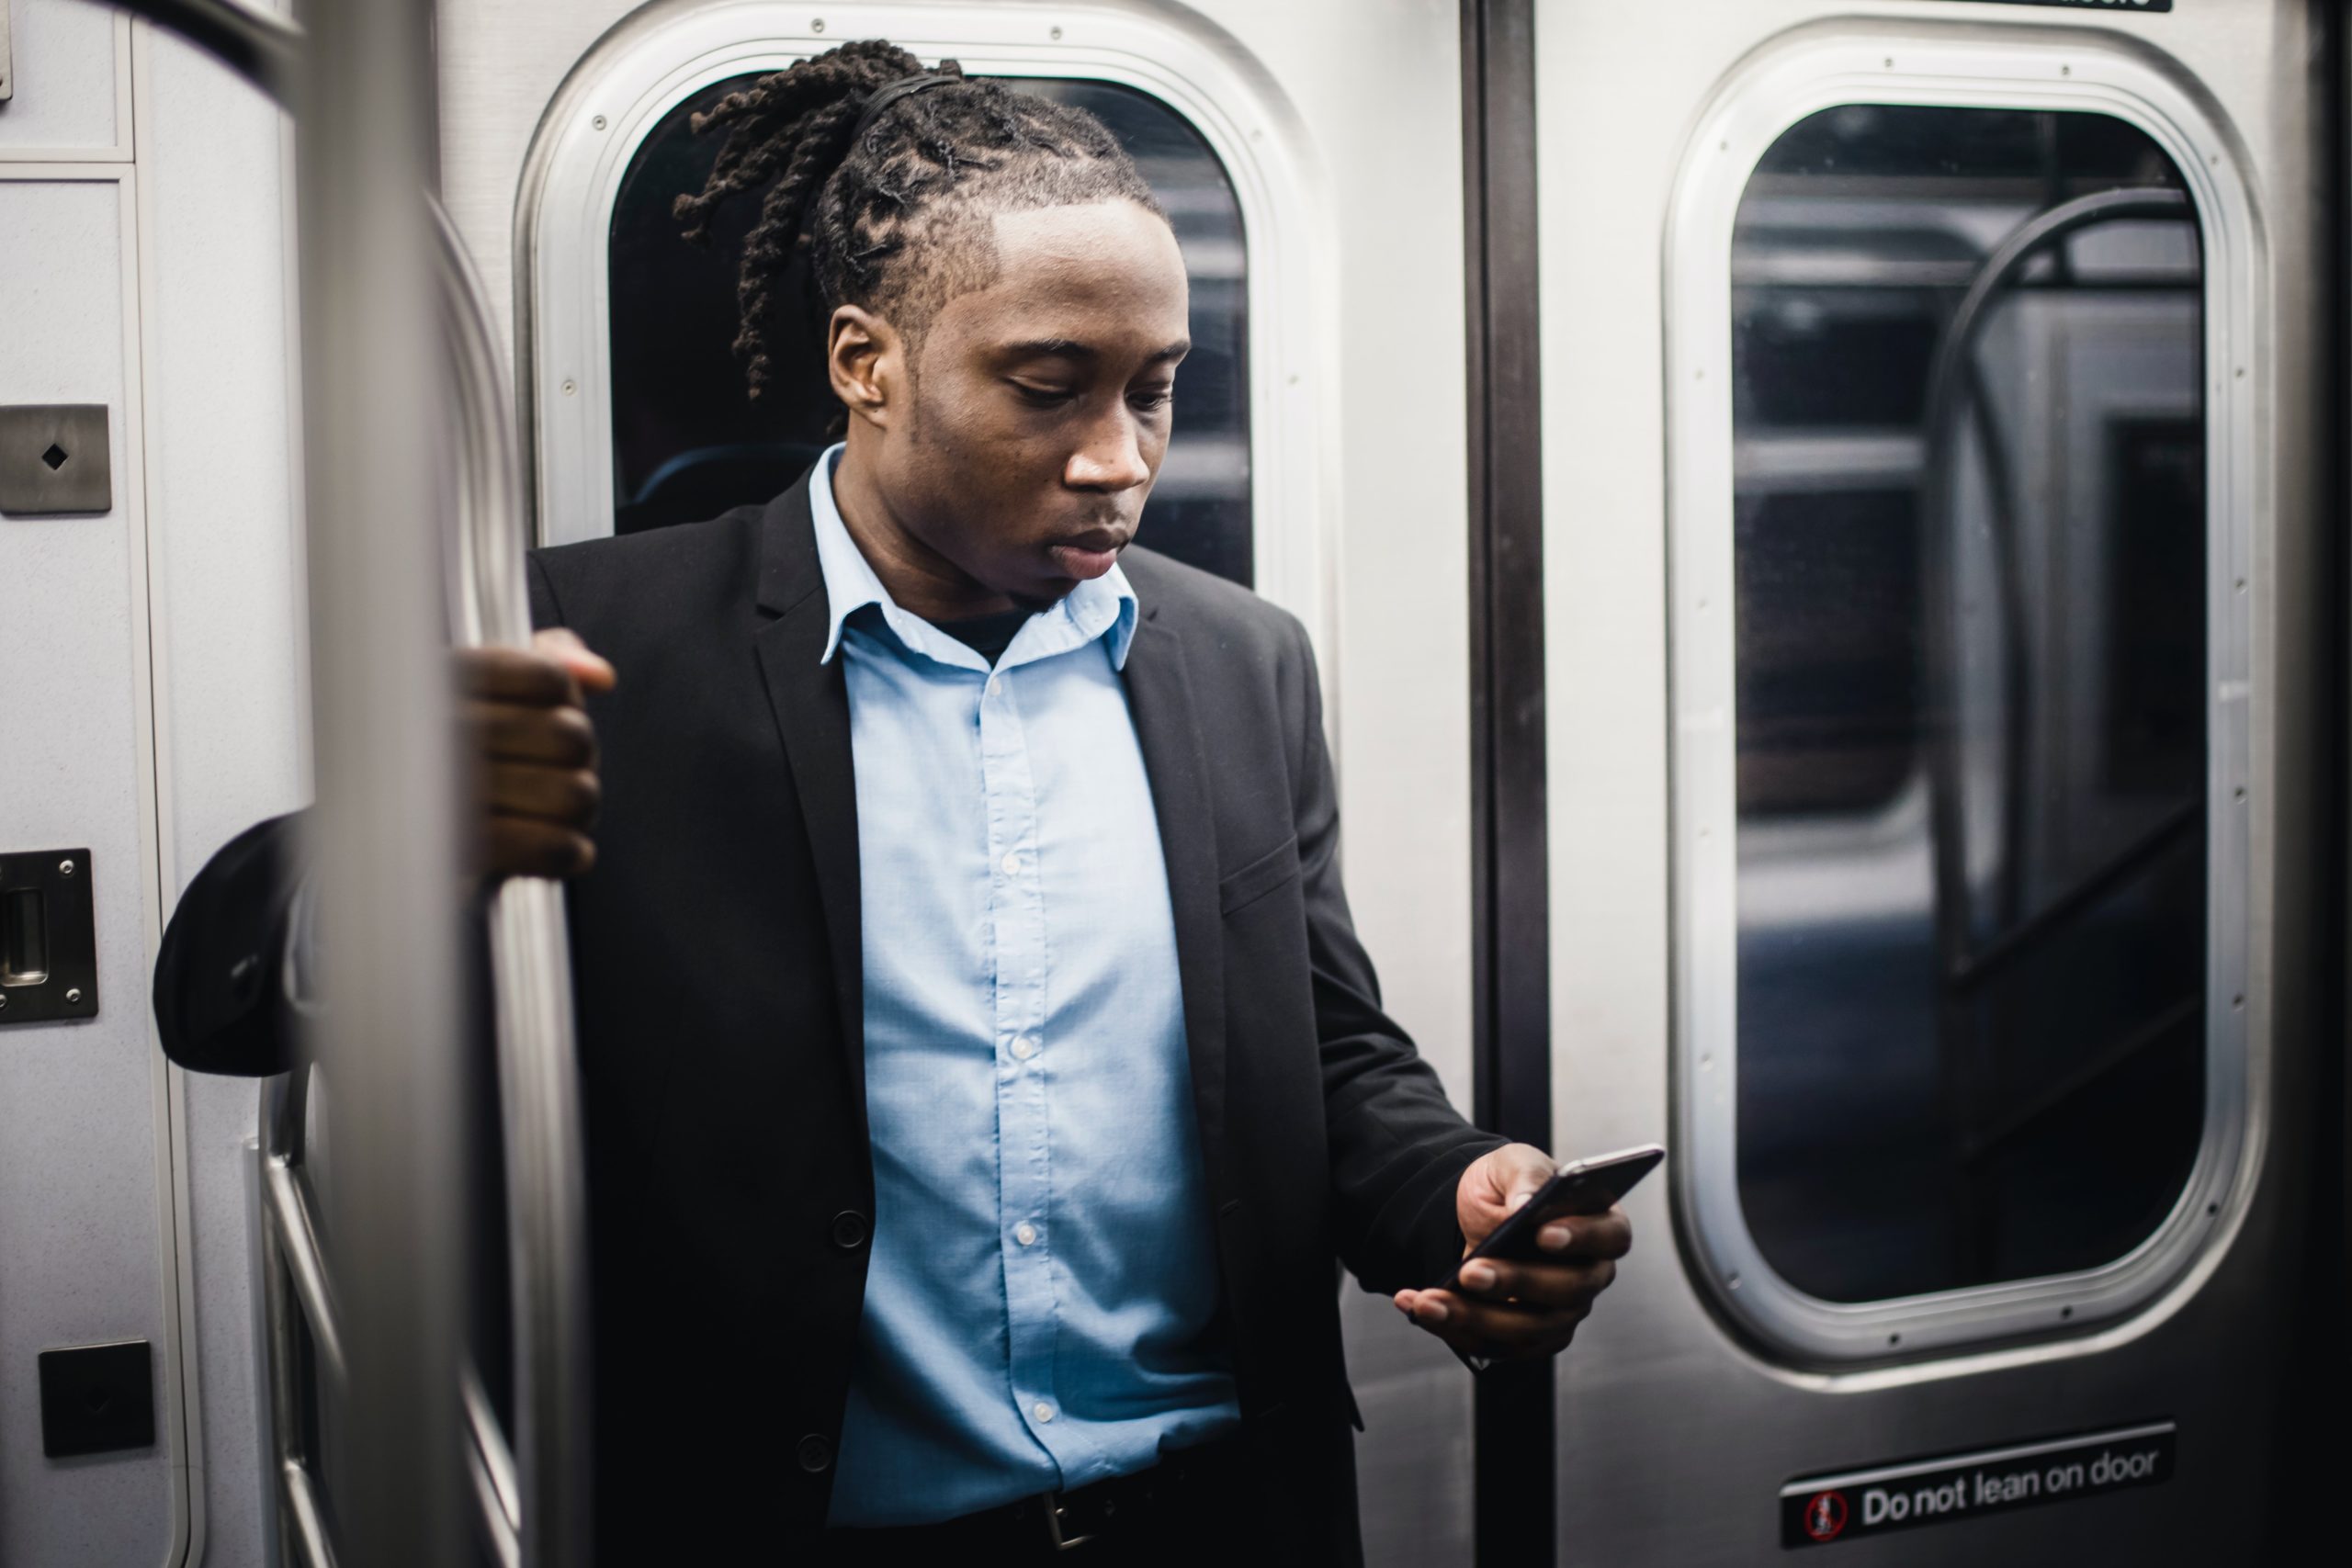 Black man staring down at his phone while on the subway